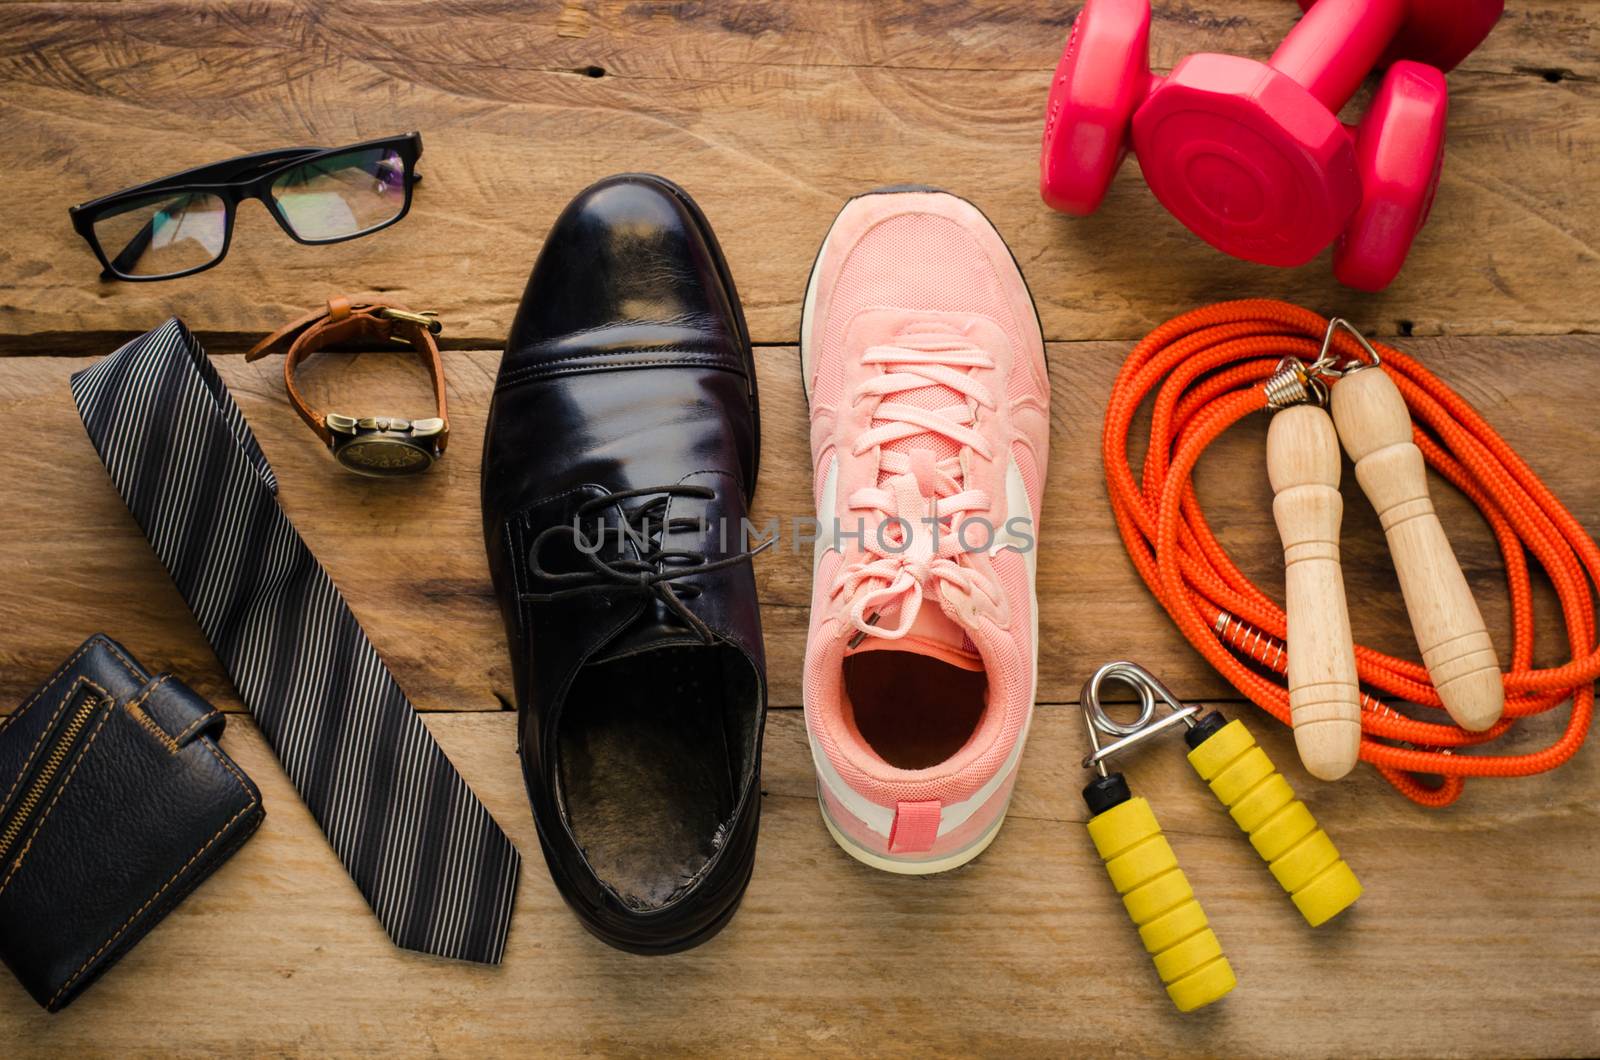 Sneakers for exercise equipment. and Leather Shoes and accessories for work on wood floors lifestyle concept.